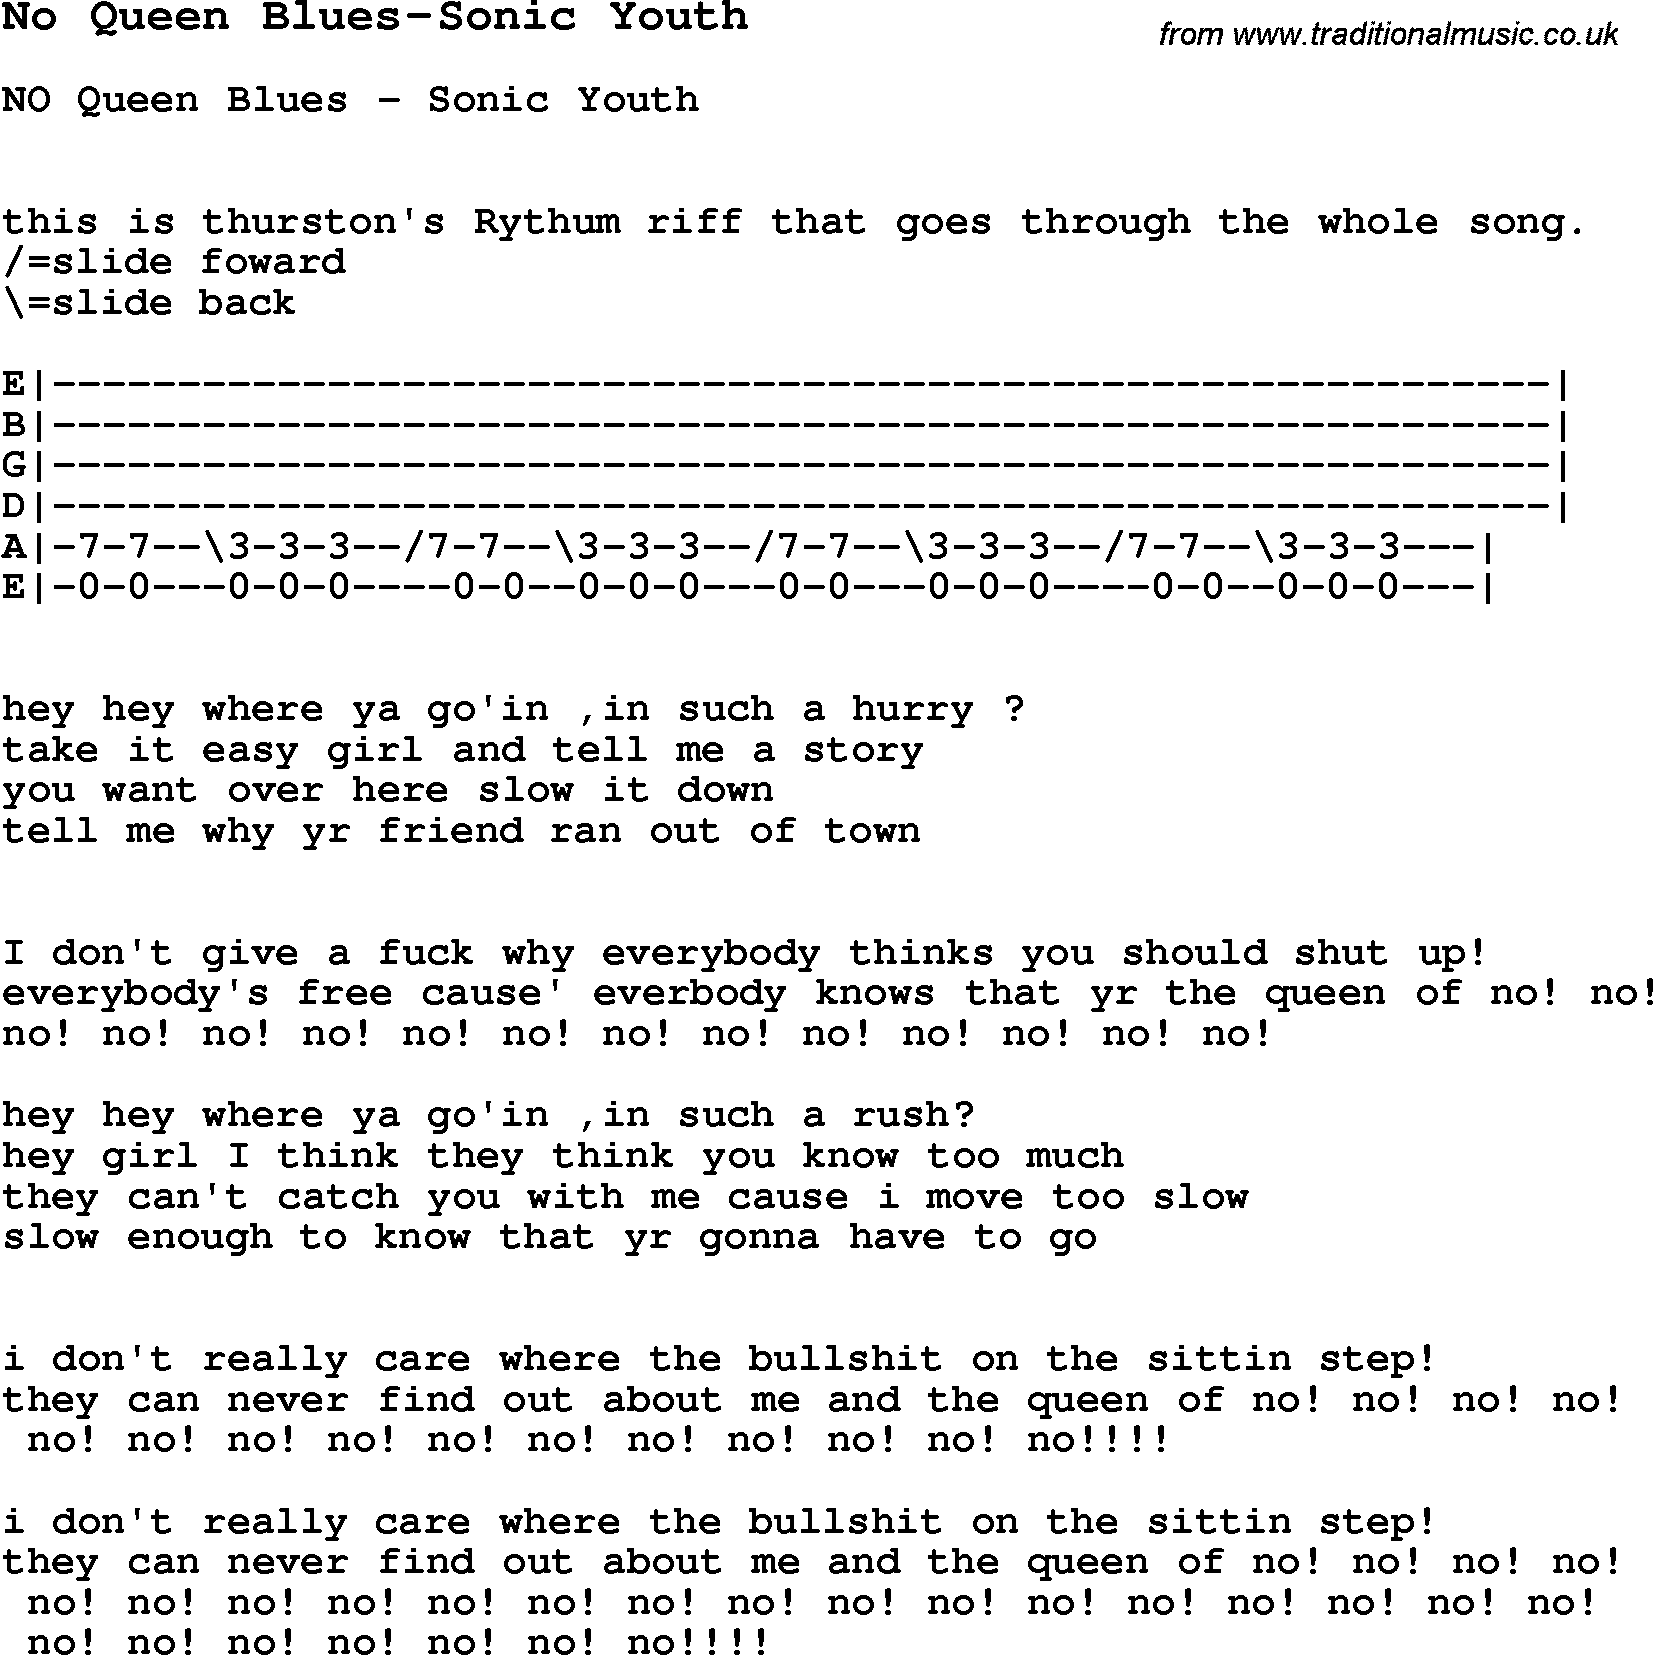 Blues Guitar Song, lyrics, chords, tablature, playing hints for No Queen Blues-Sonic Youth